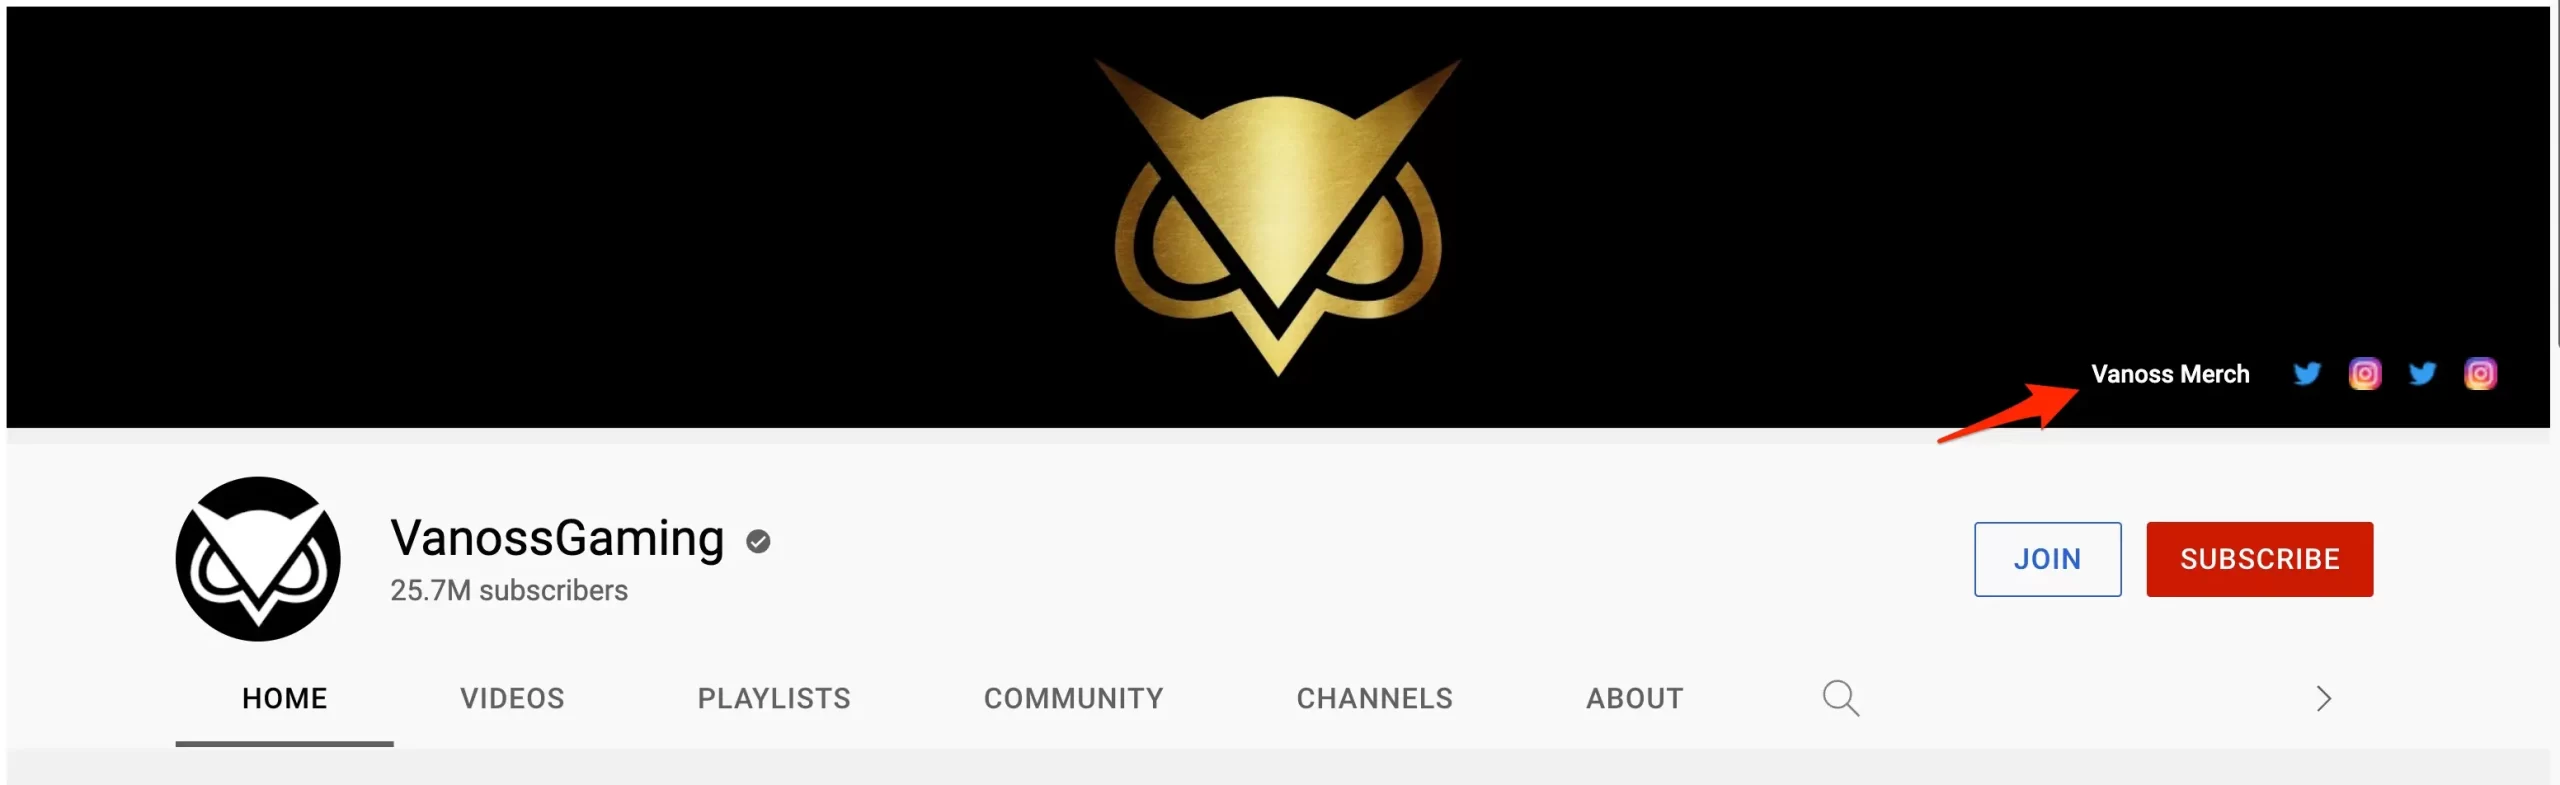 Links on Channel Banner